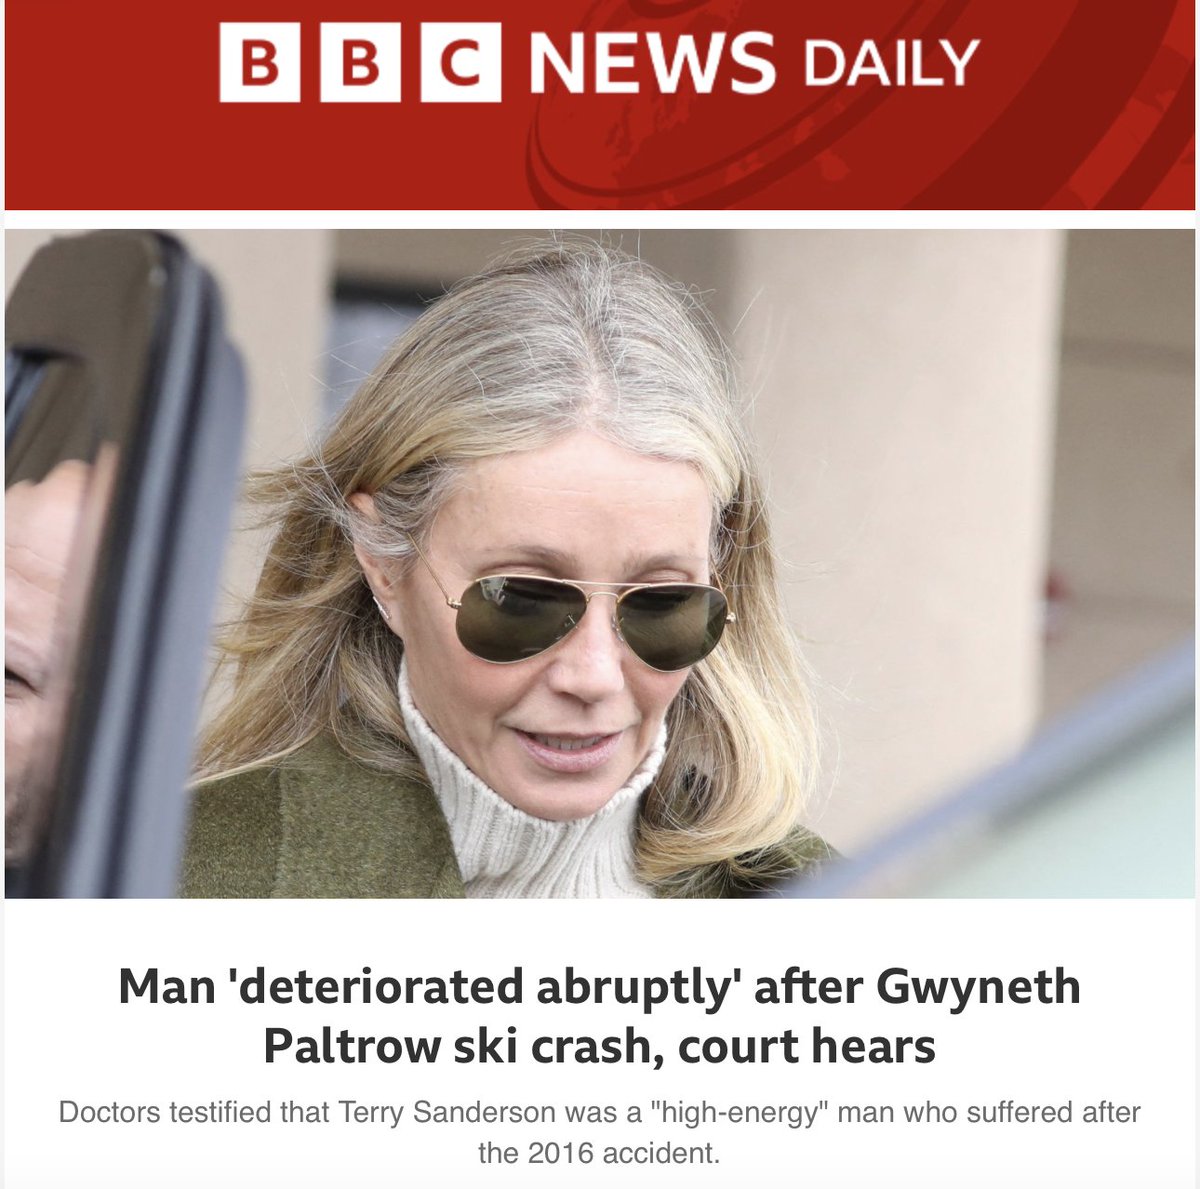 Thanks to the BBC, we know that today's BIG NEWS isn't Bank of England interest rates or Boris Johnson at the Priveleges Committee. It's Gwenyth Paltrow's ski accident. #BBCimpartiality #BBCswitchoff #Utahcentric